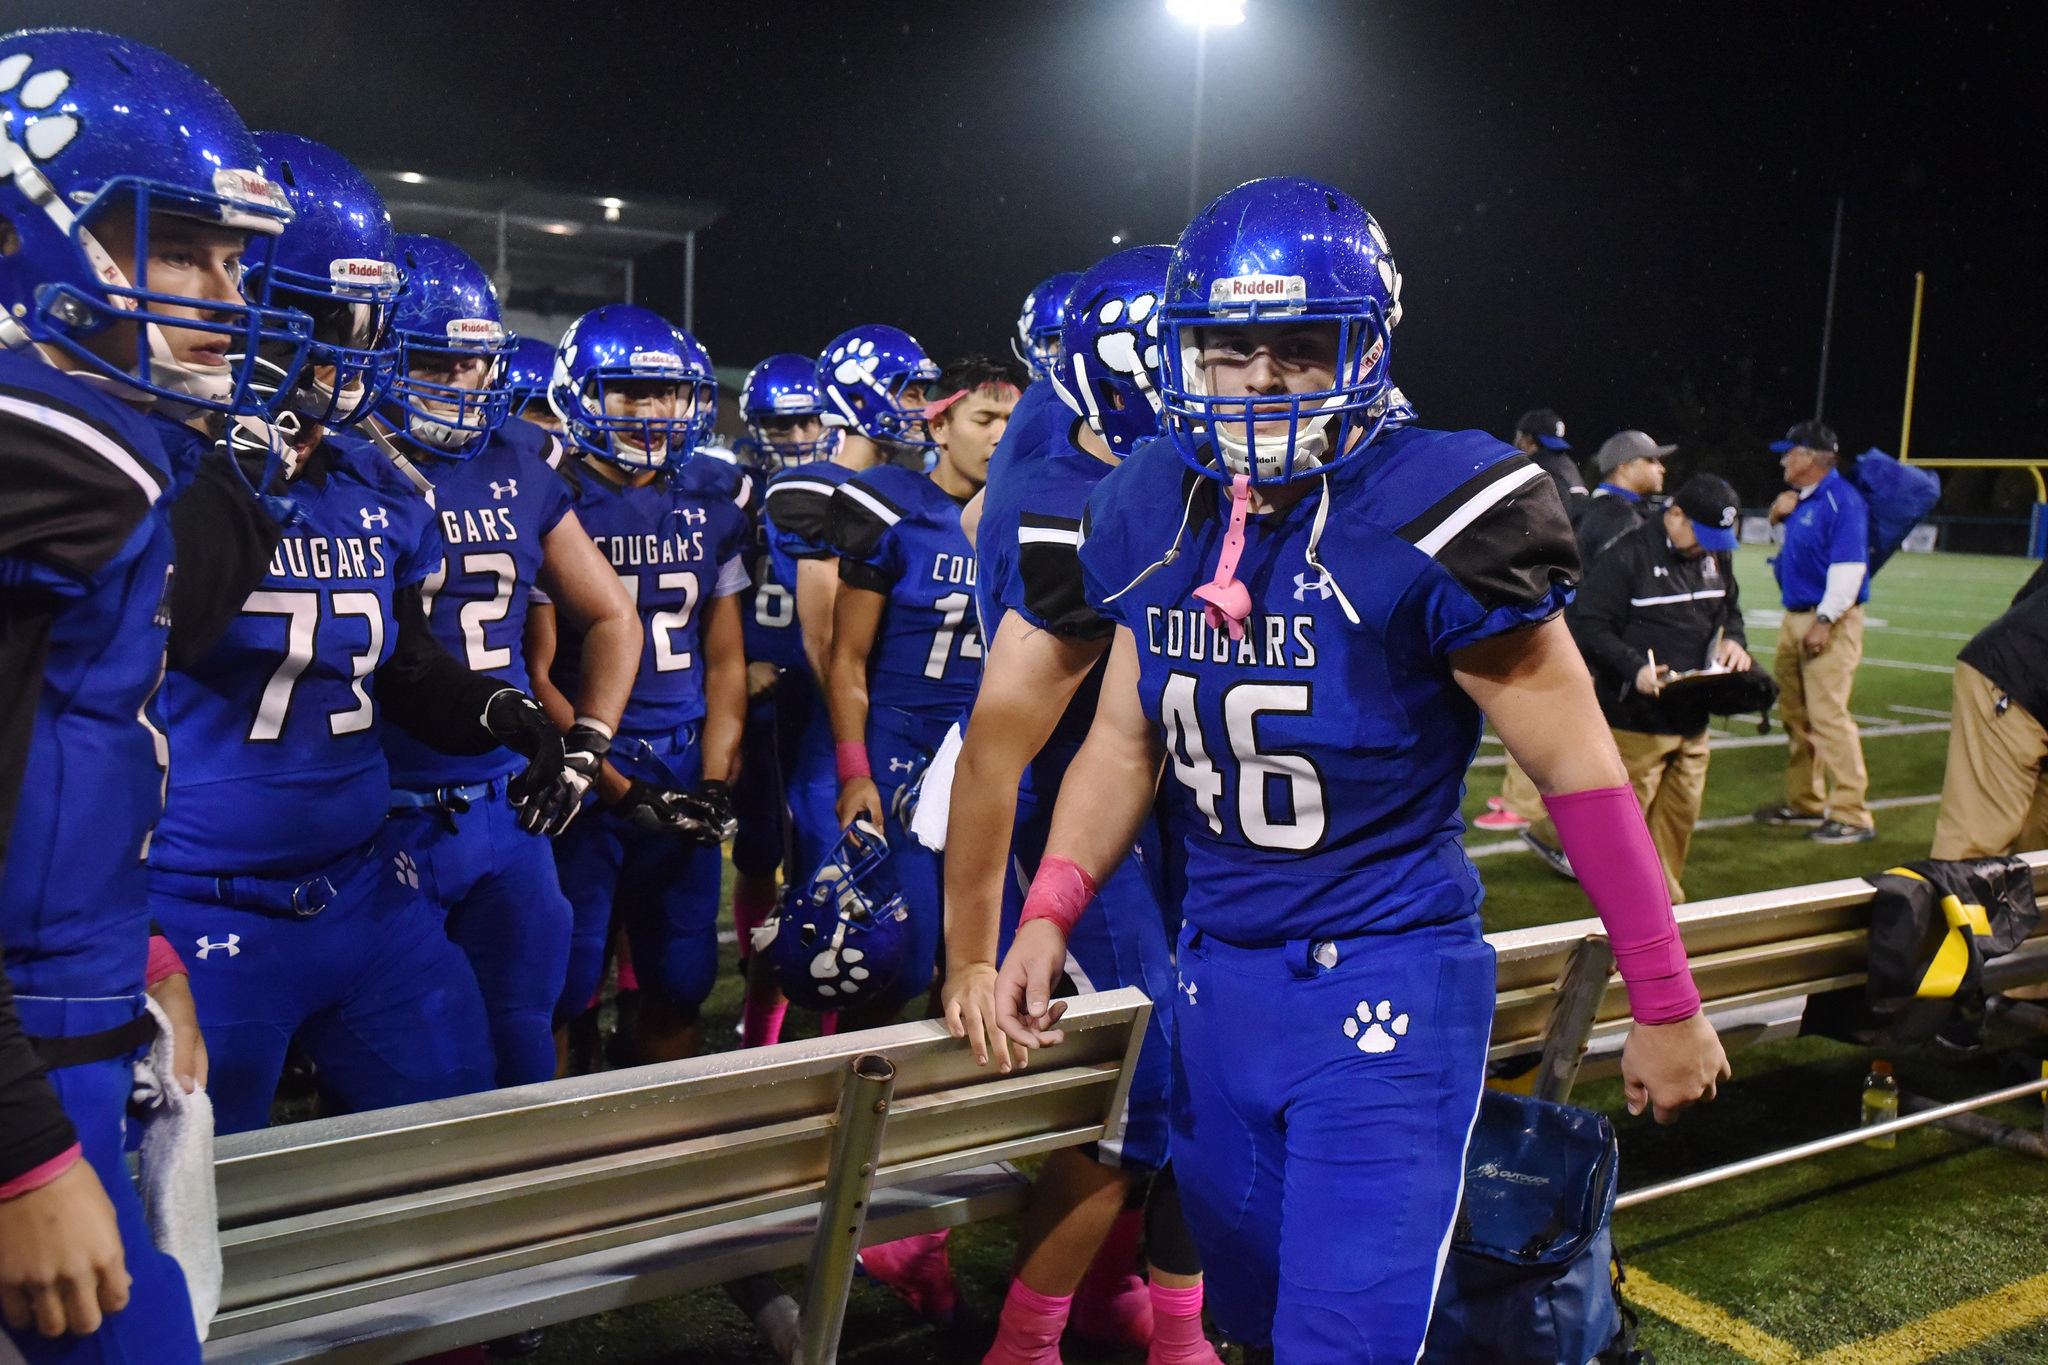 The Bothell High football team stands in front of the student section after losing to Skyline